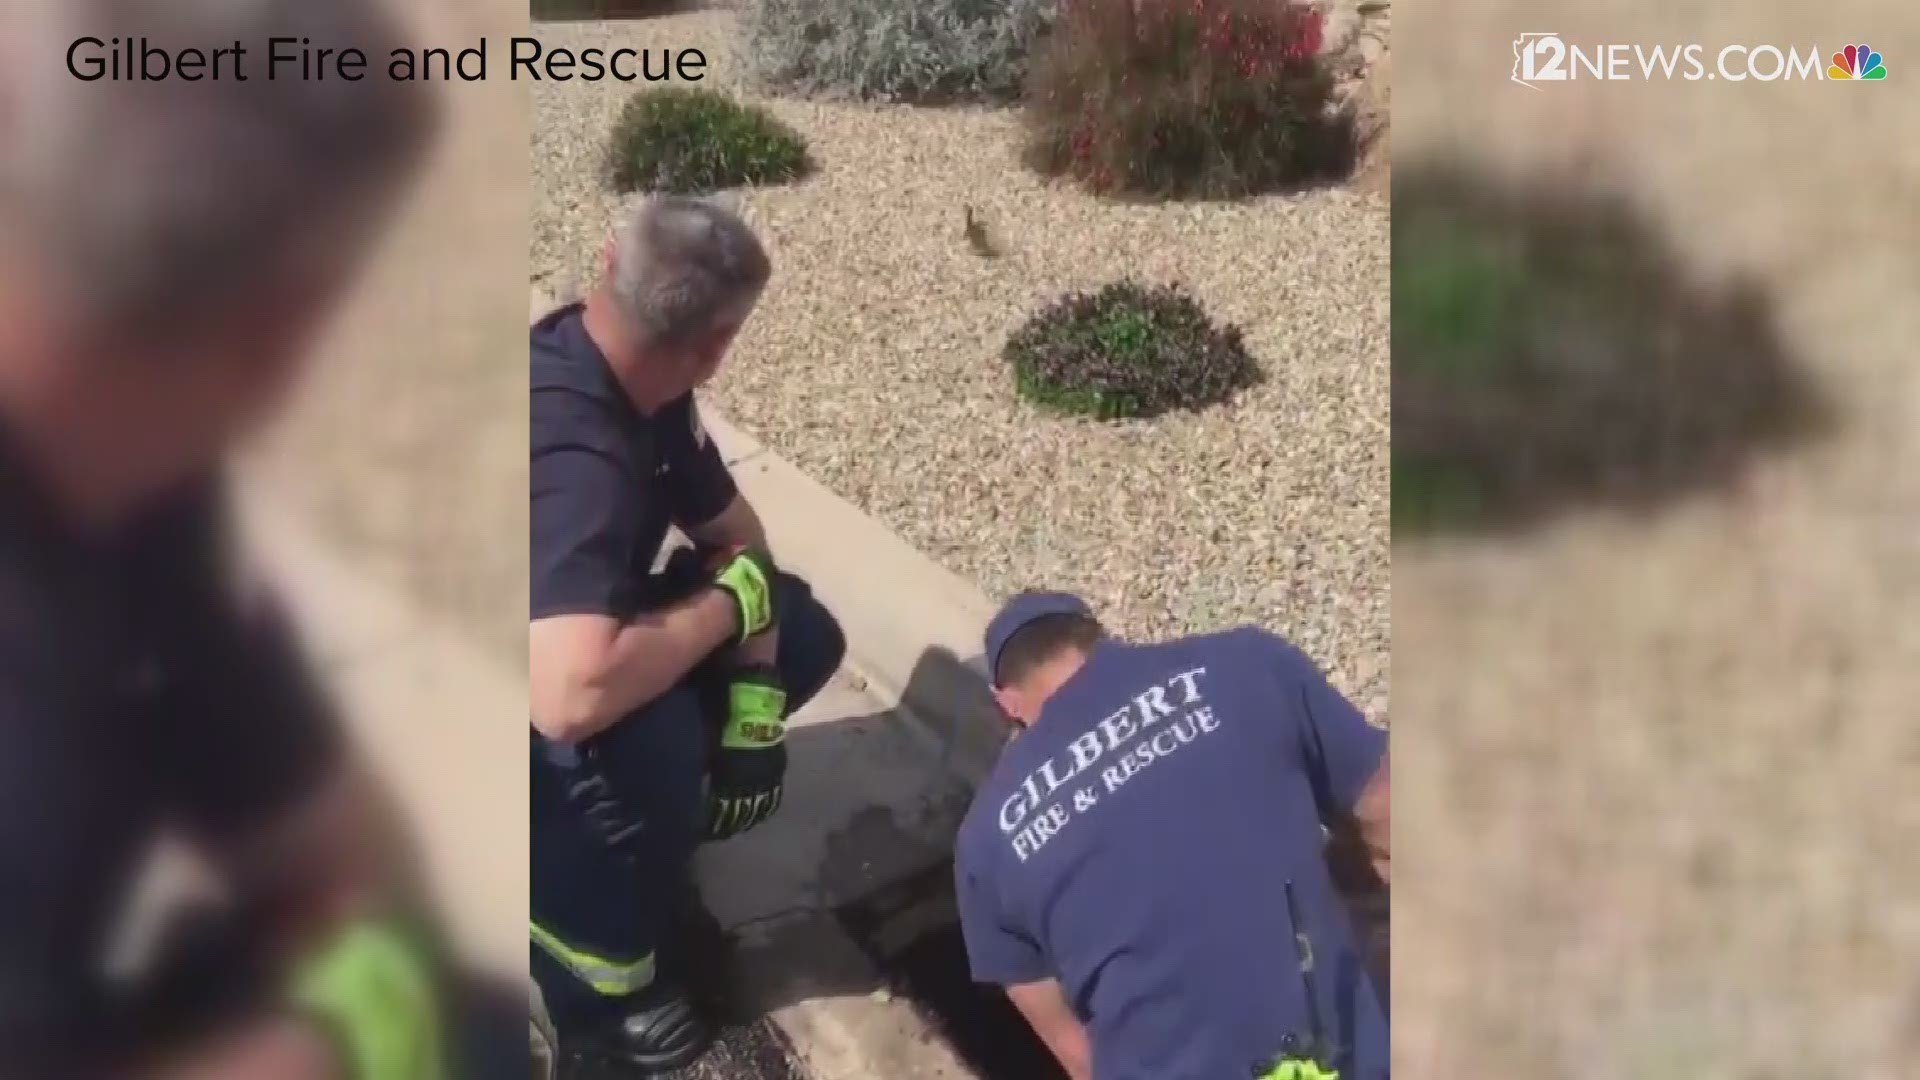 Need a smile? Gilbert firefighters rescued 6 ducklings that were trapped in a storm drain. Momma was definitely thankful for these firefighters!